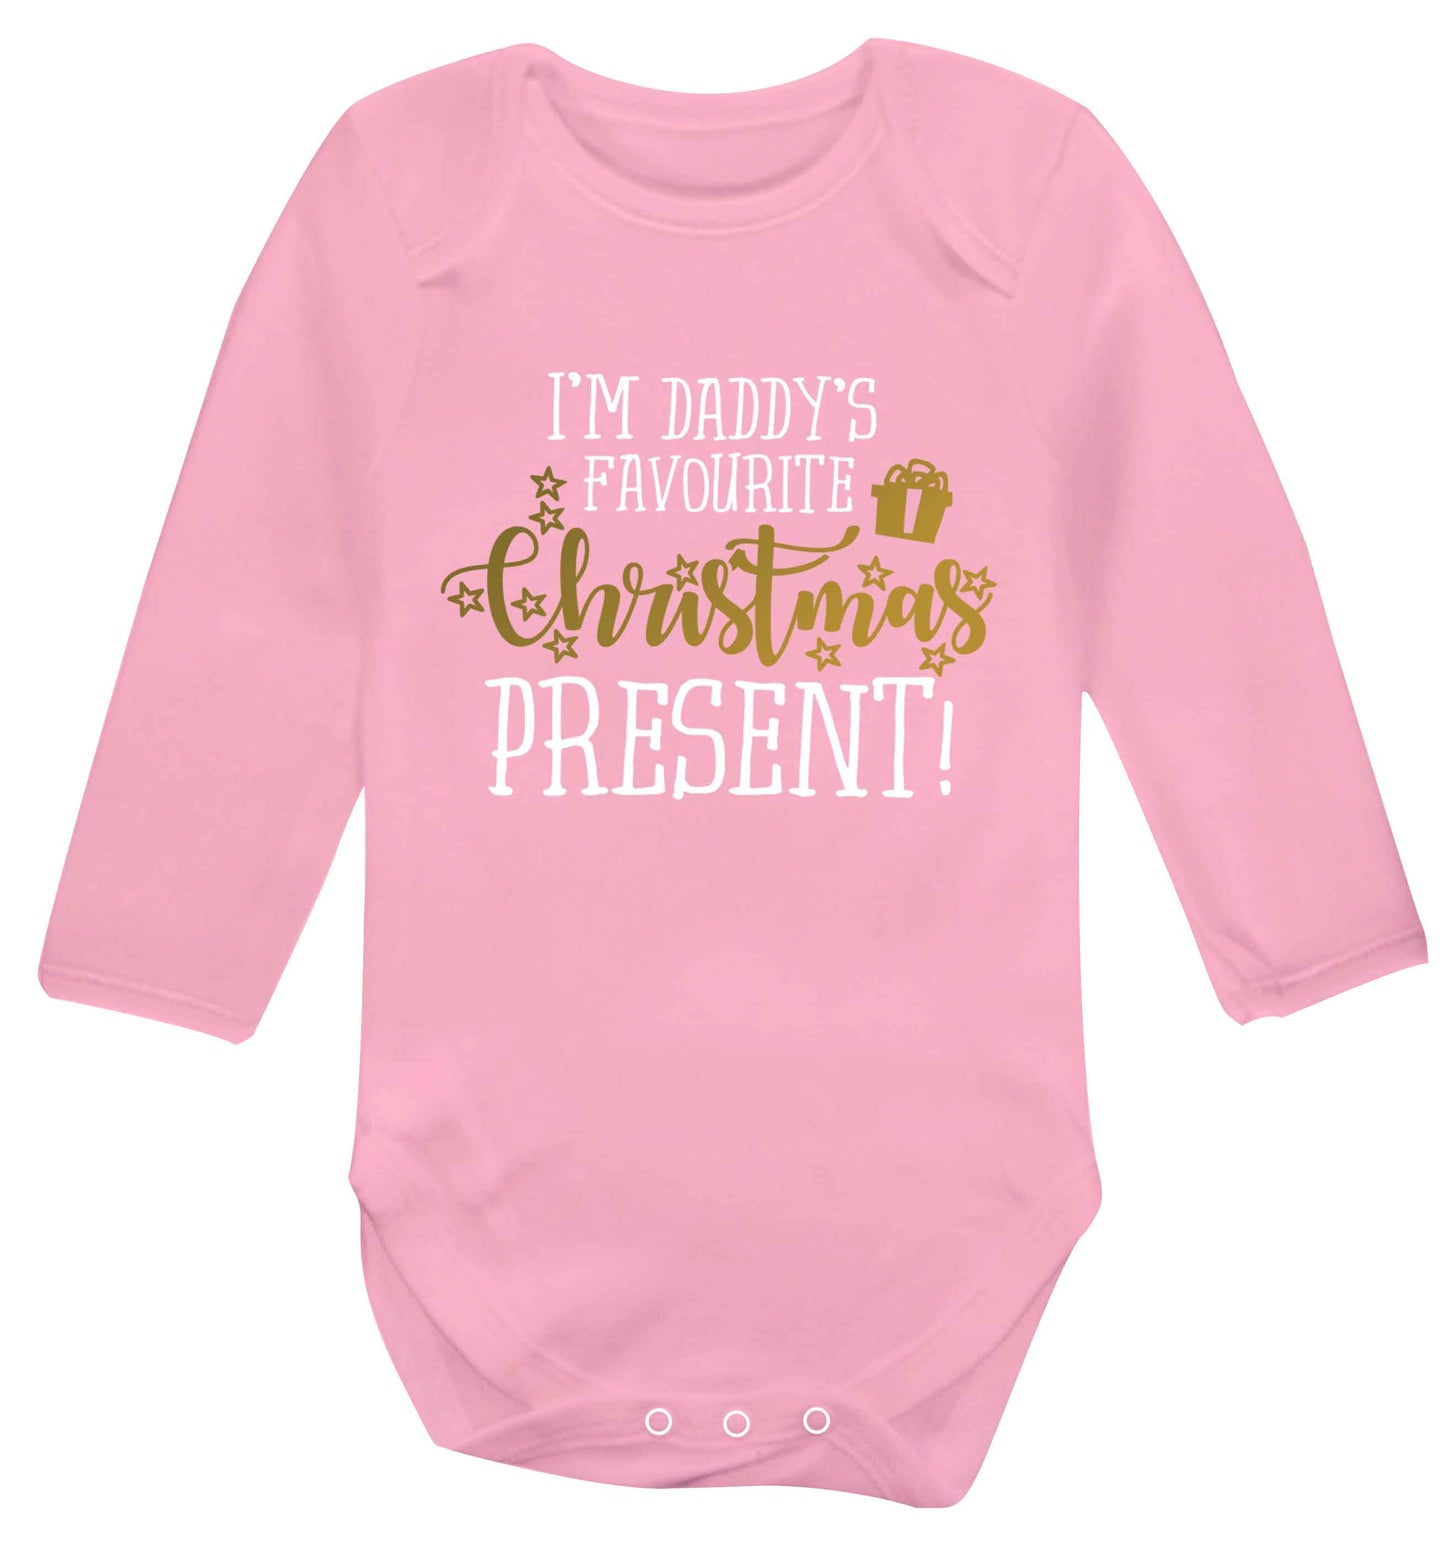 Daddy's favourite Christmas present Baby Vest long sleeved pale pink 6-12 months